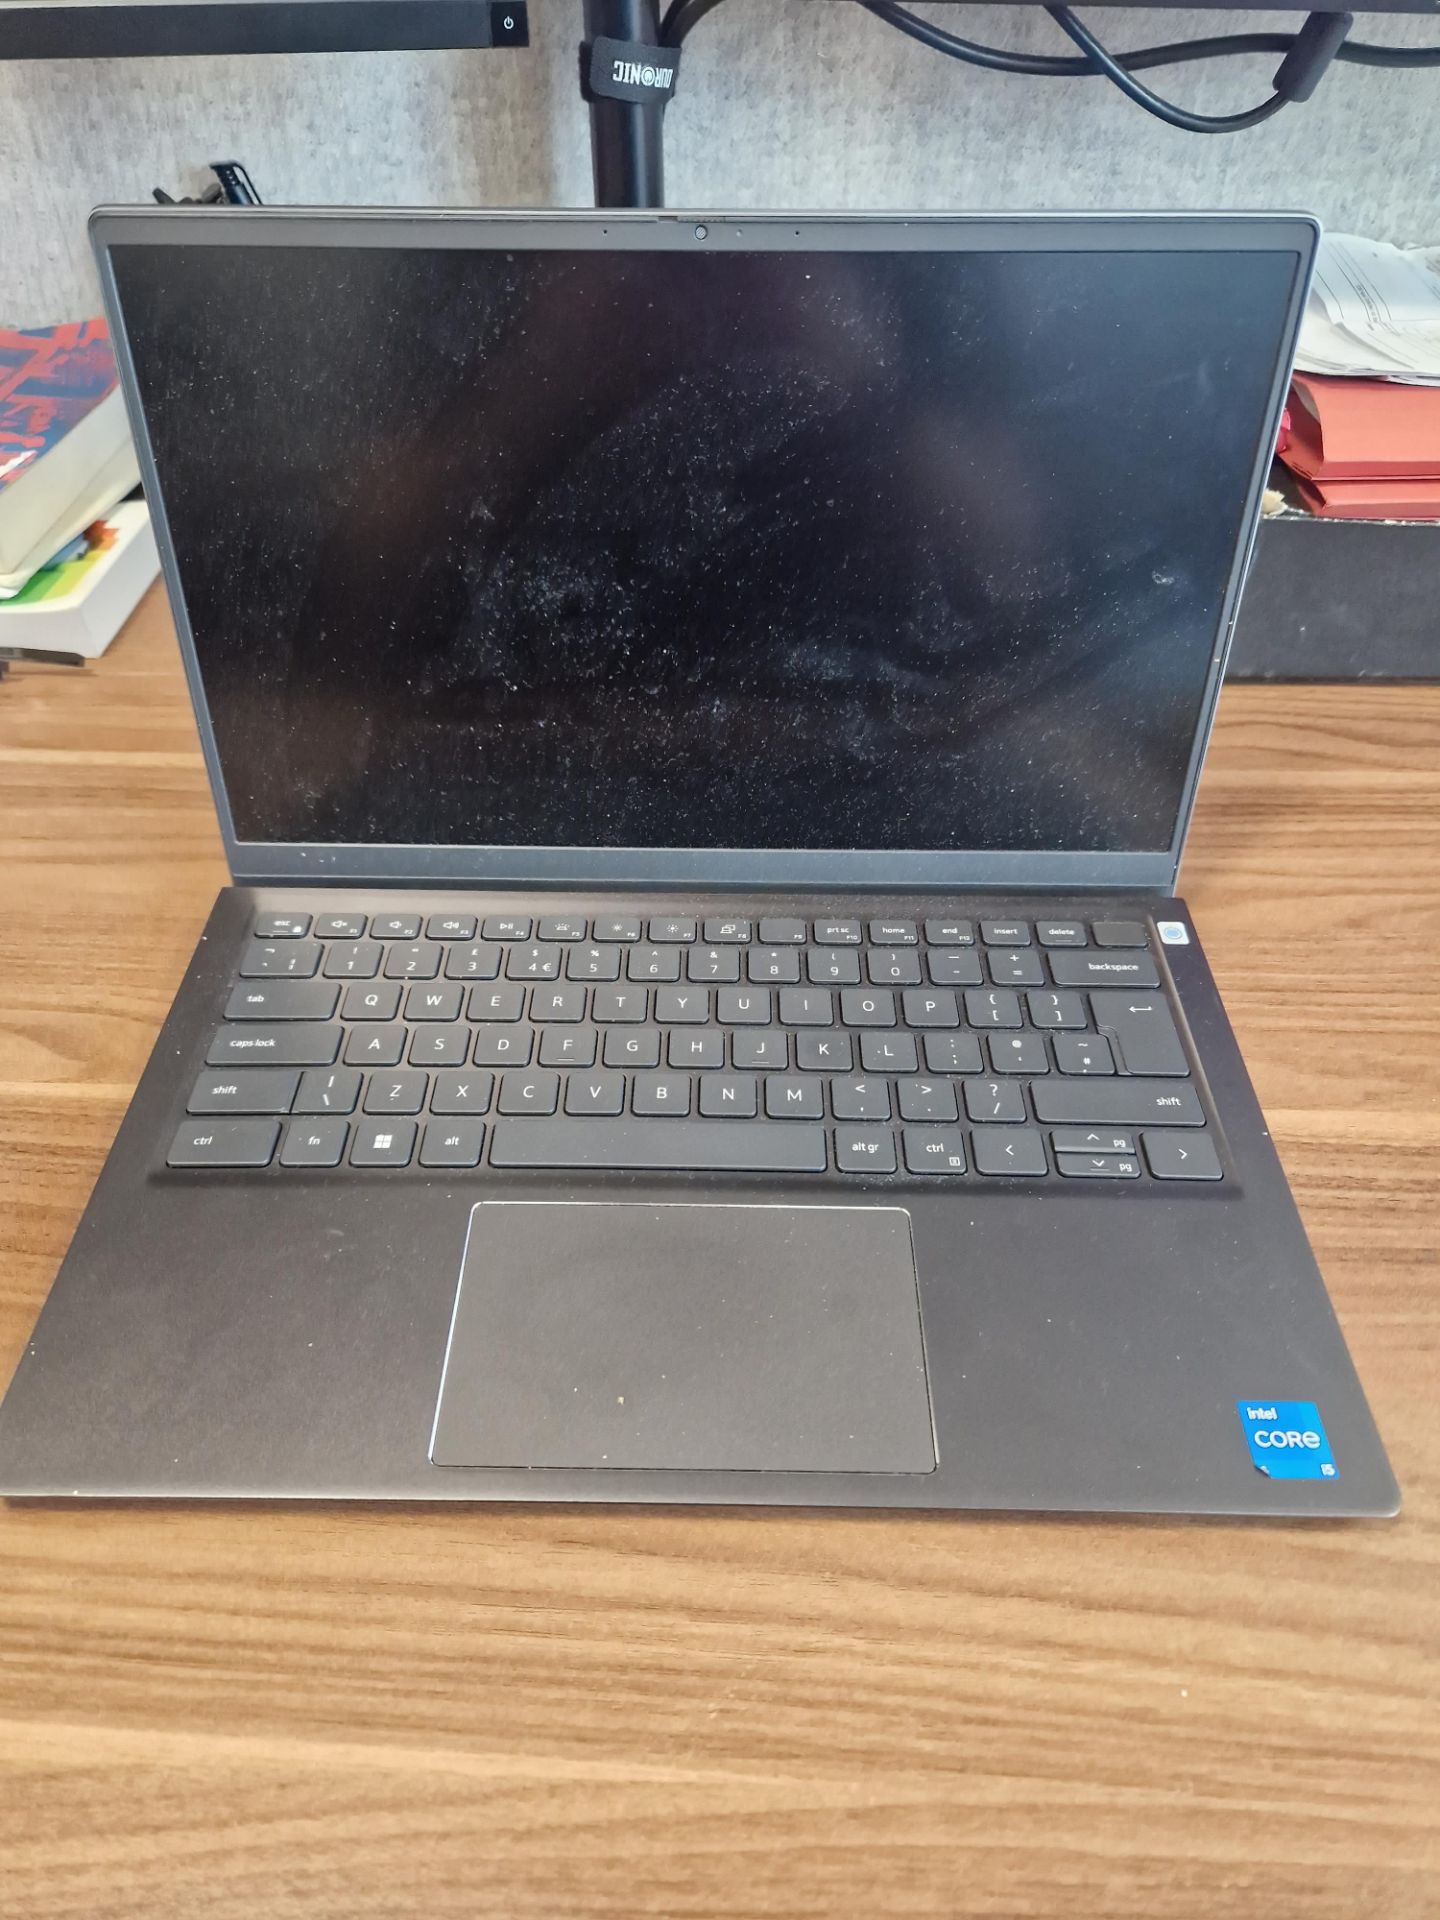 Dell Vostro Core i5 Laptop (No Charger) (Hard Drive Removed) - Image 2 of 3